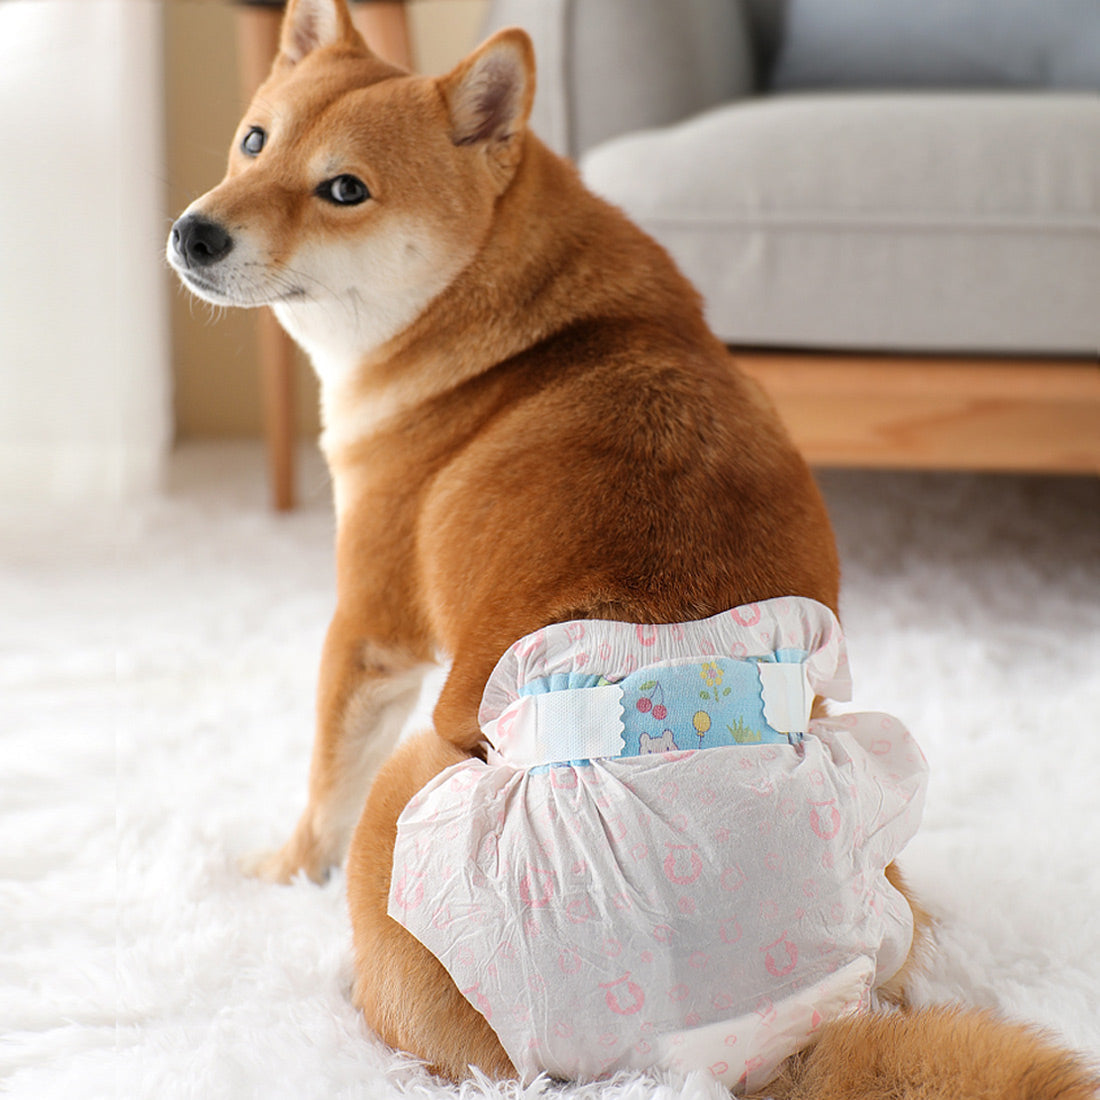 Pet Disposable Diapers Dog Puppy Nappy Hygienic Male Female Wraps Toilet Trainer